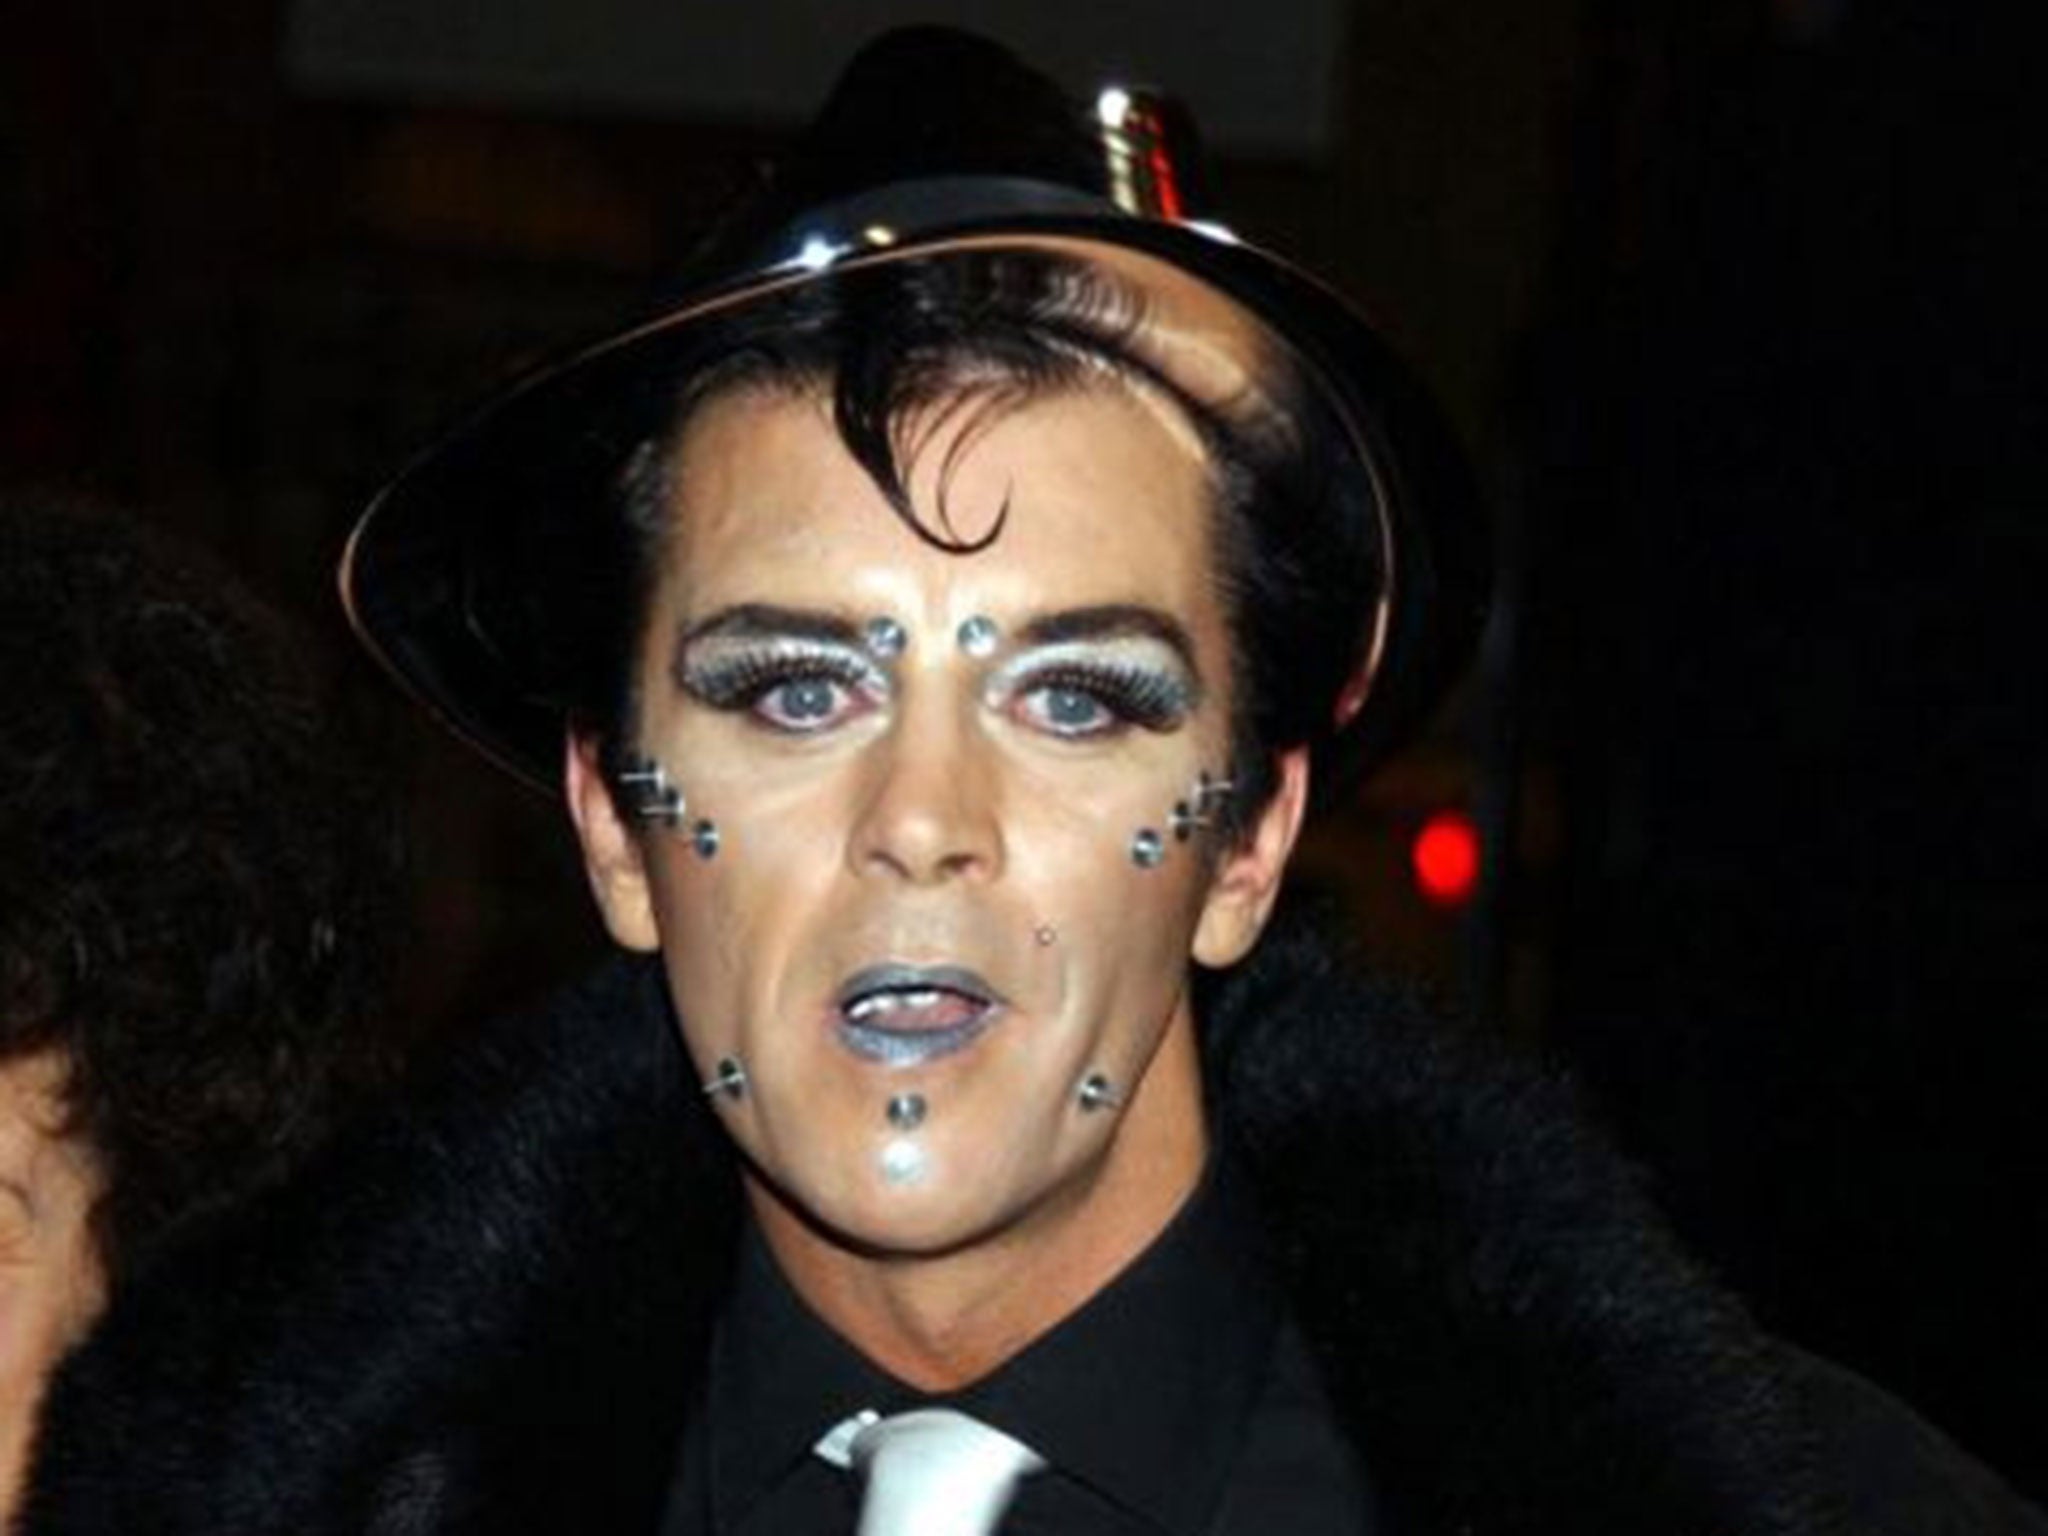 Steve Strange as the New Romantic pioneer has died of a heart attack in Egypt at the age of 55, his record label said.